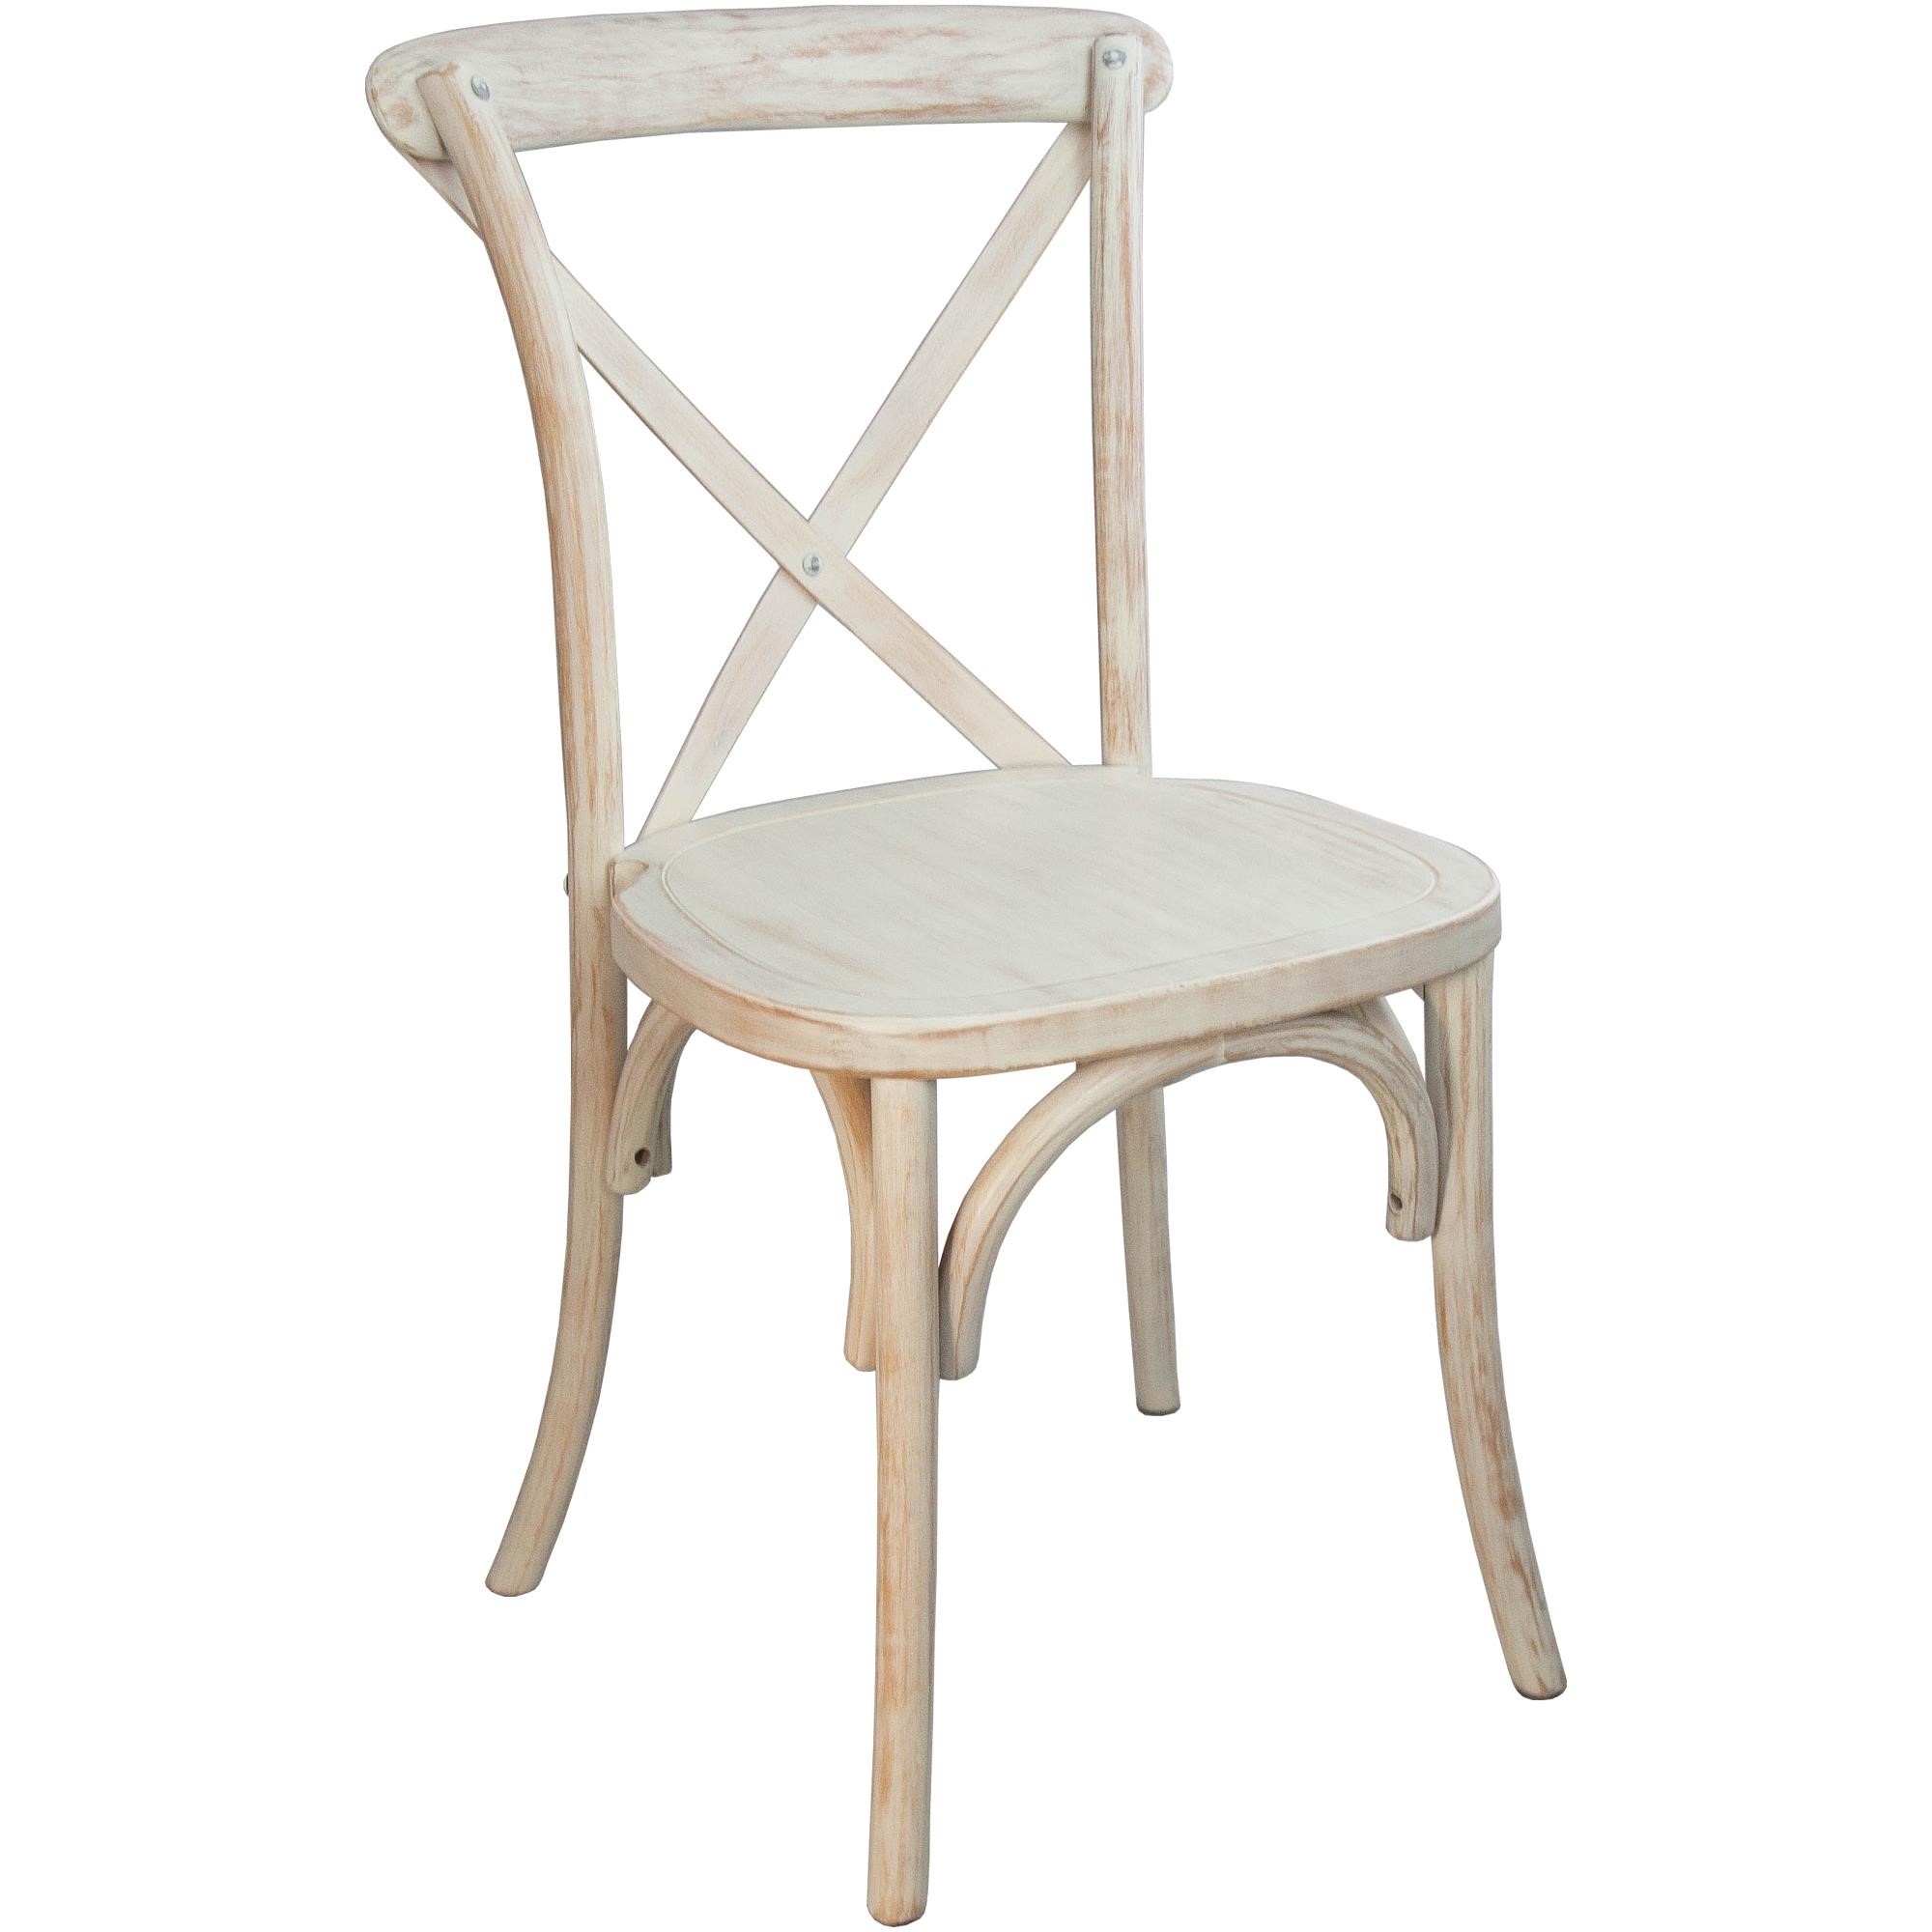 35 Advantage Lime Wash X-Back Wooden Dining Chair